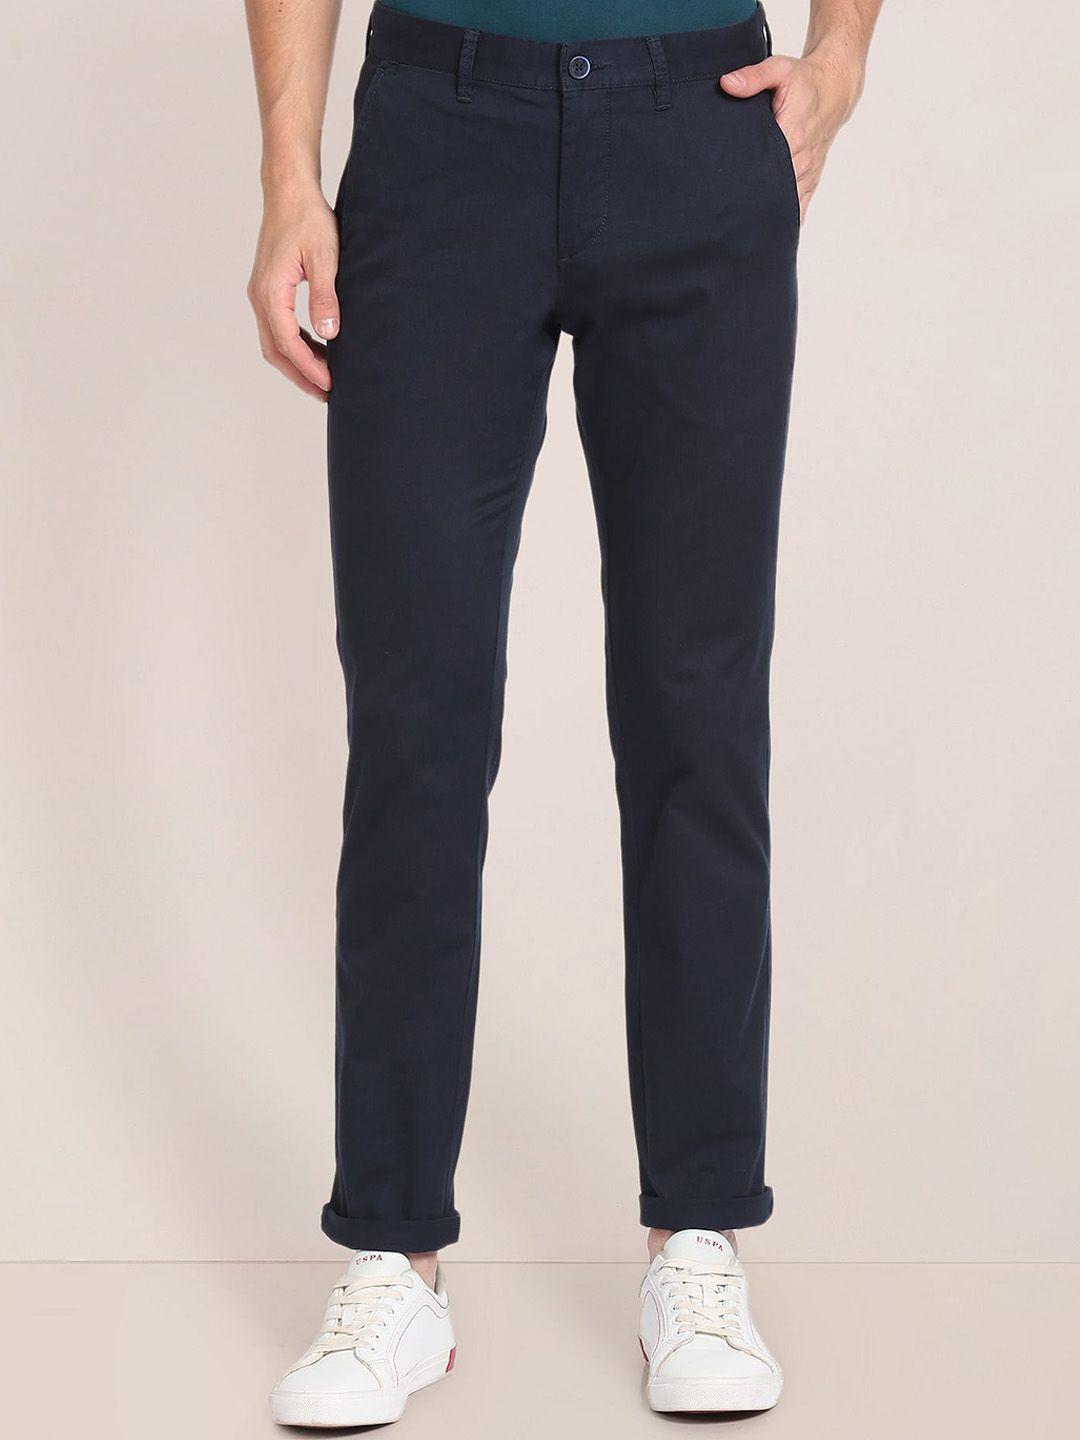 u-s-polo-assn-men-blue-straight-fit-trousers